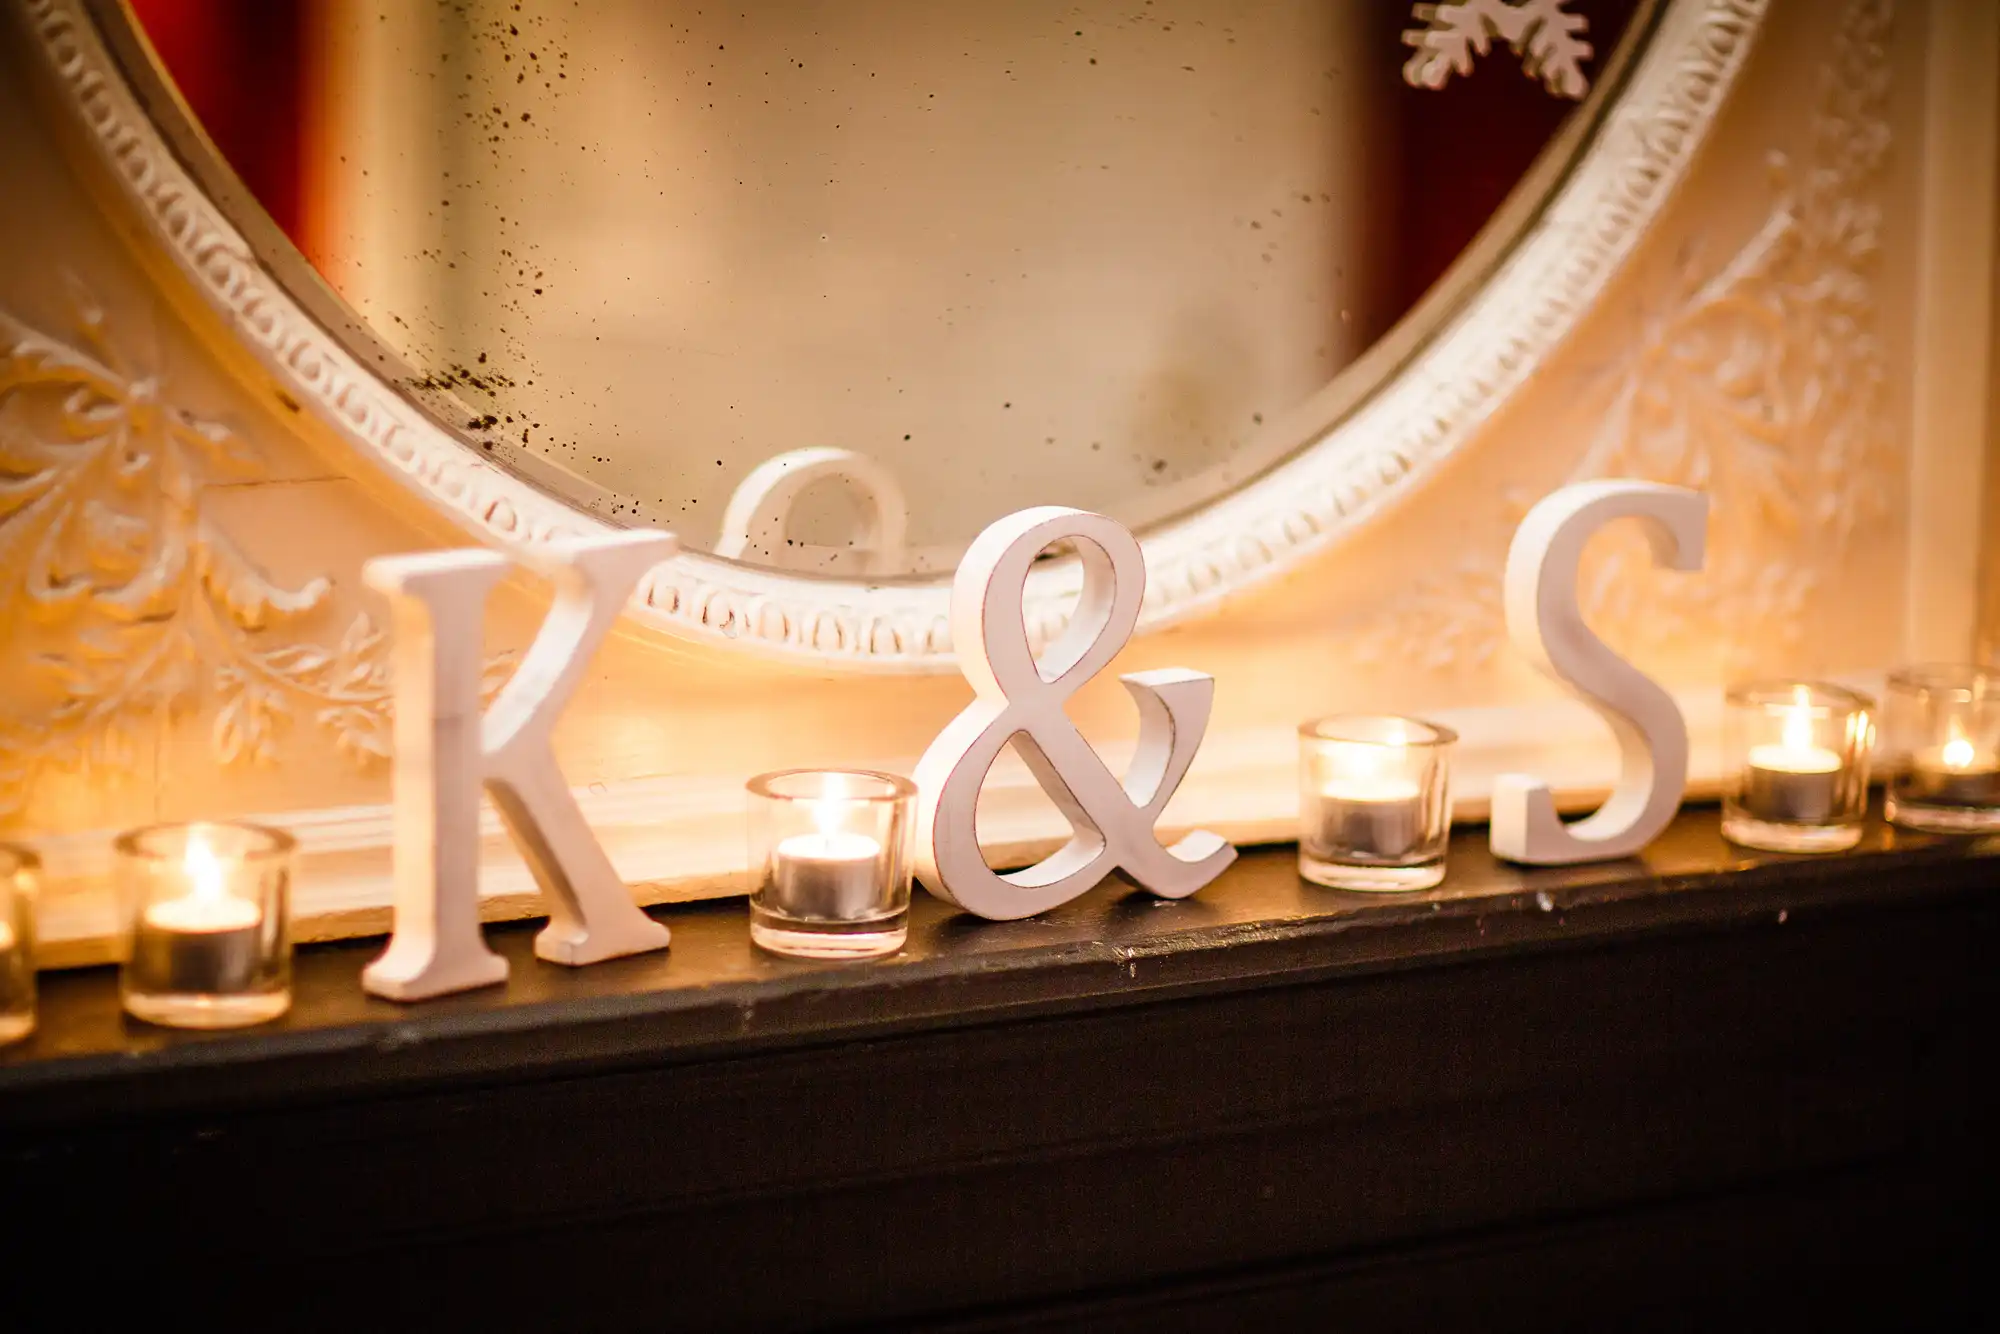 White letters "k & s" on a mantelpiece with lit candles and a decorative mirror in the background.